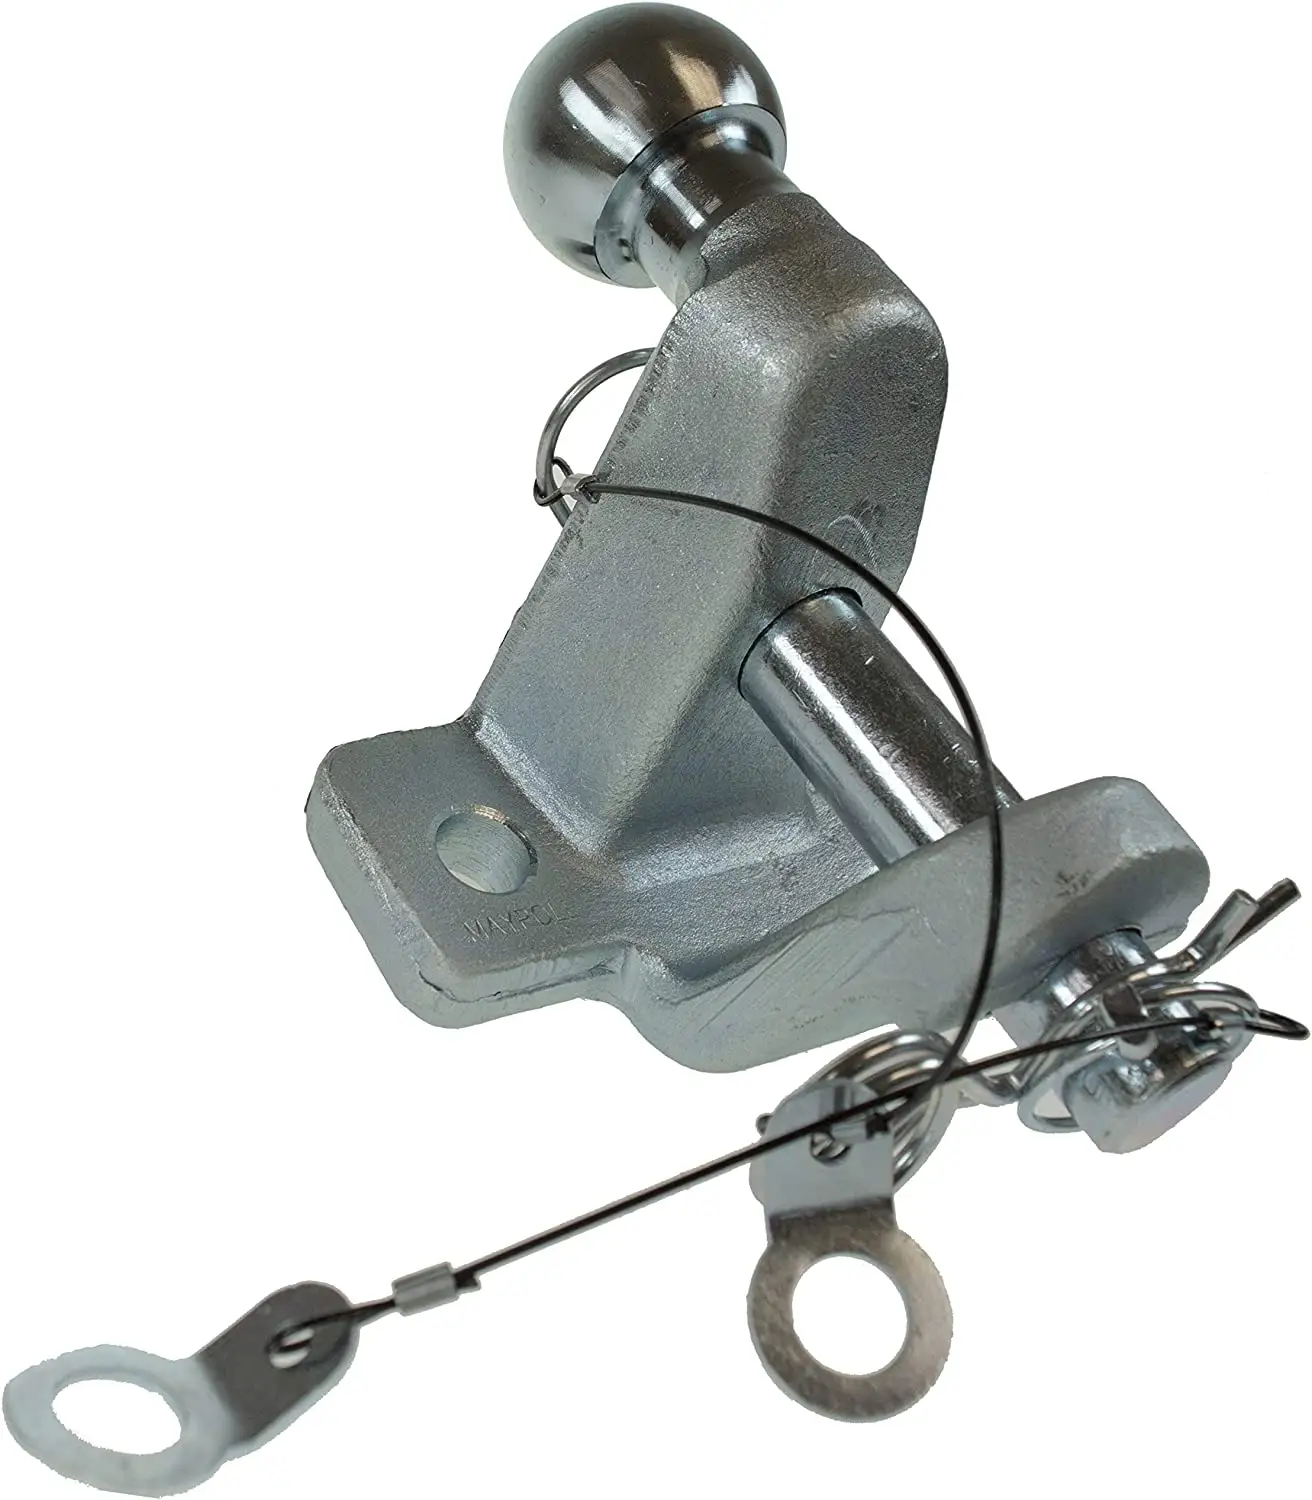 Factory trailer hitch goose neck 3500 lb 50mm tow ball